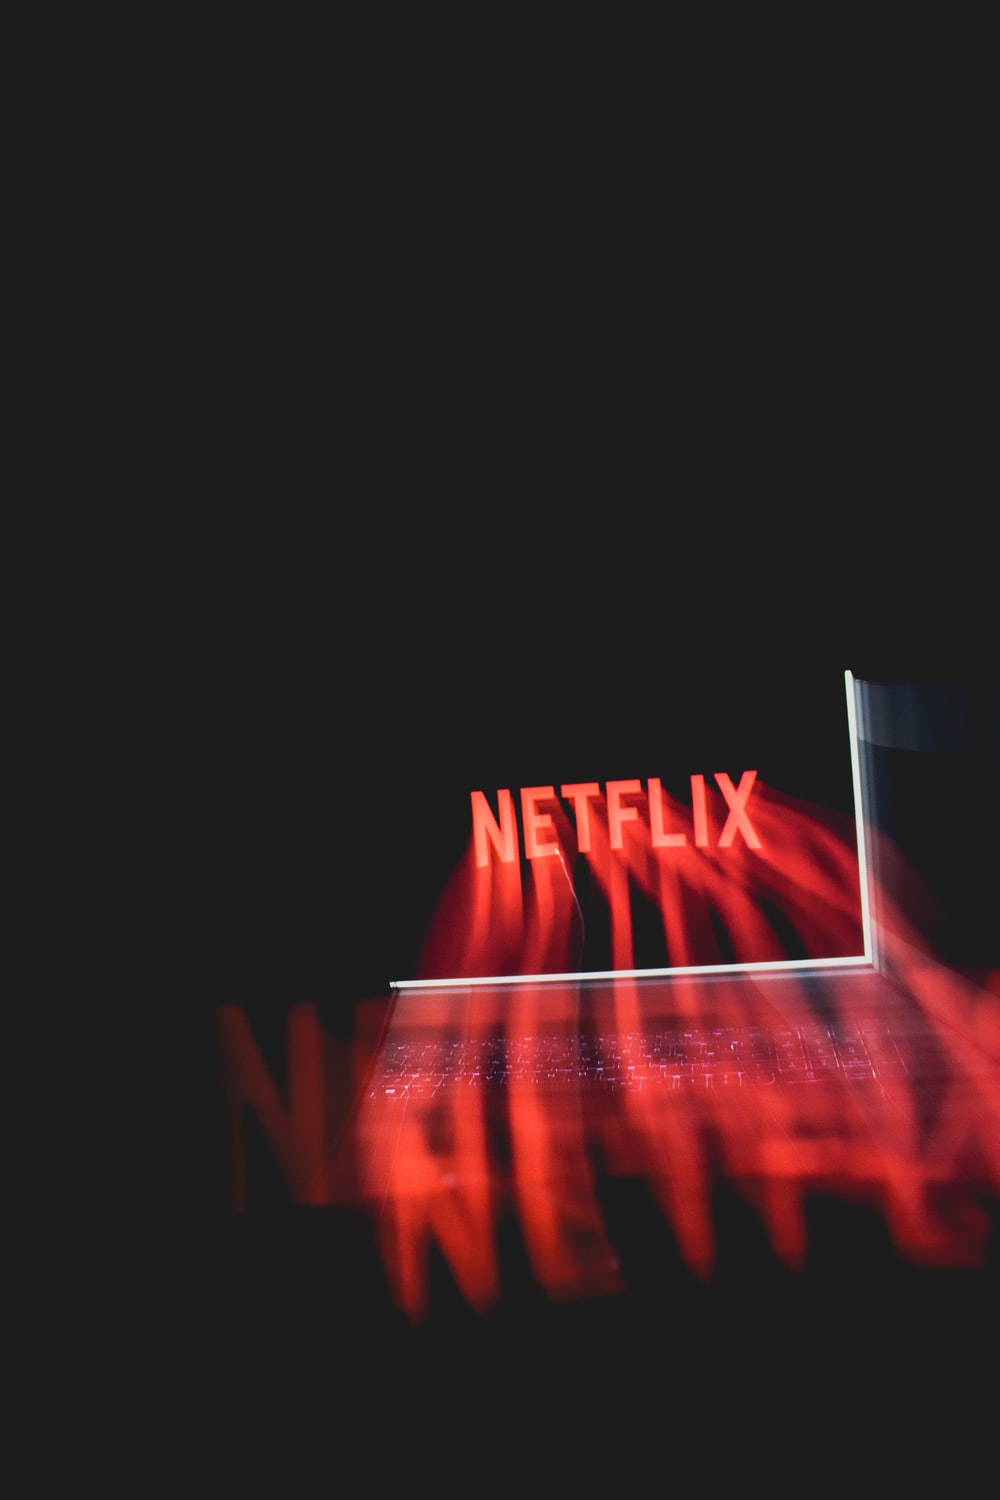 Netflix & Chill Picture. Download Free Image